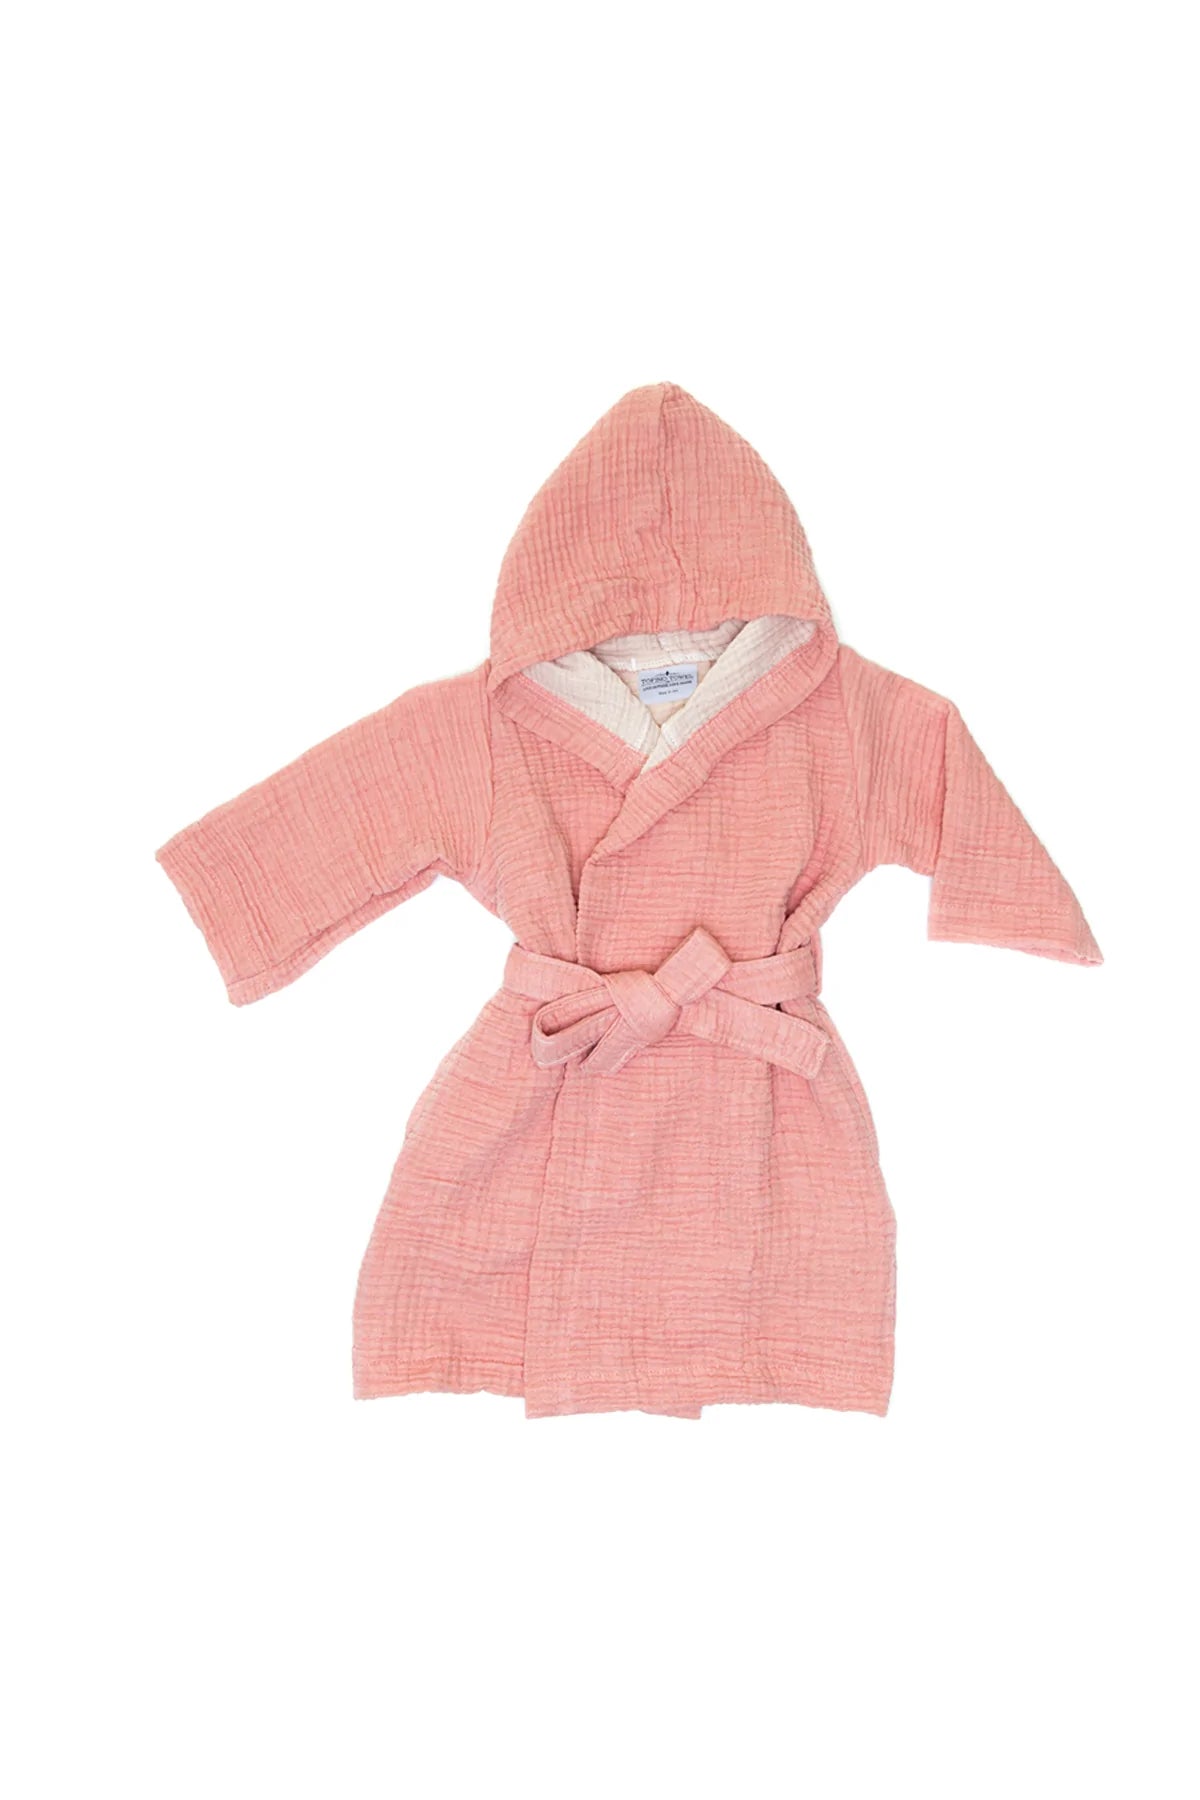 The Piper Kids Robe by Tofino Towel Co.